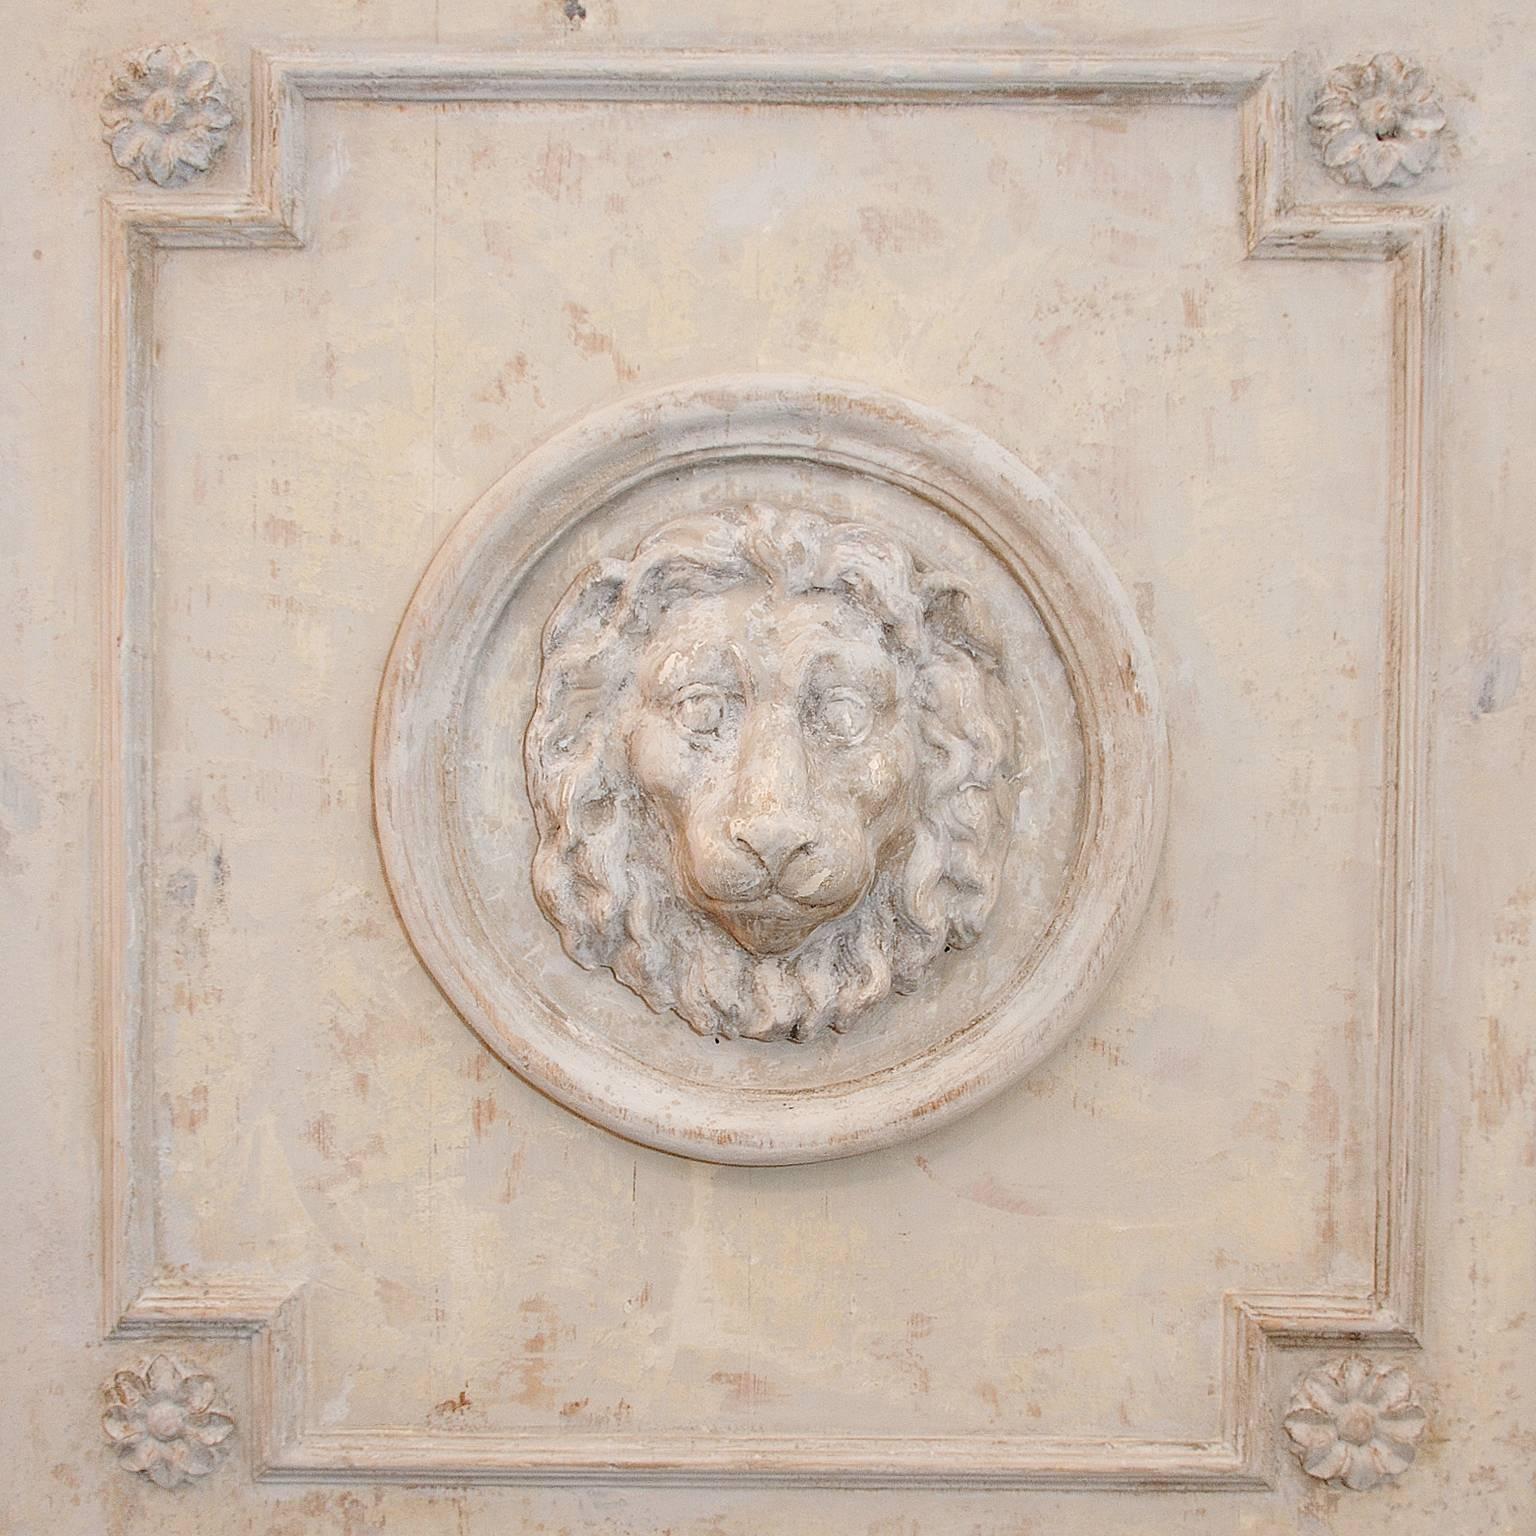 This is a very attractive large 18th century French neoclassical trumeau mirror with wonderful central lion mask design and columns to the sides, retaining its original mirror glass.

Dry scrapped back to its original old white paint finish, circa